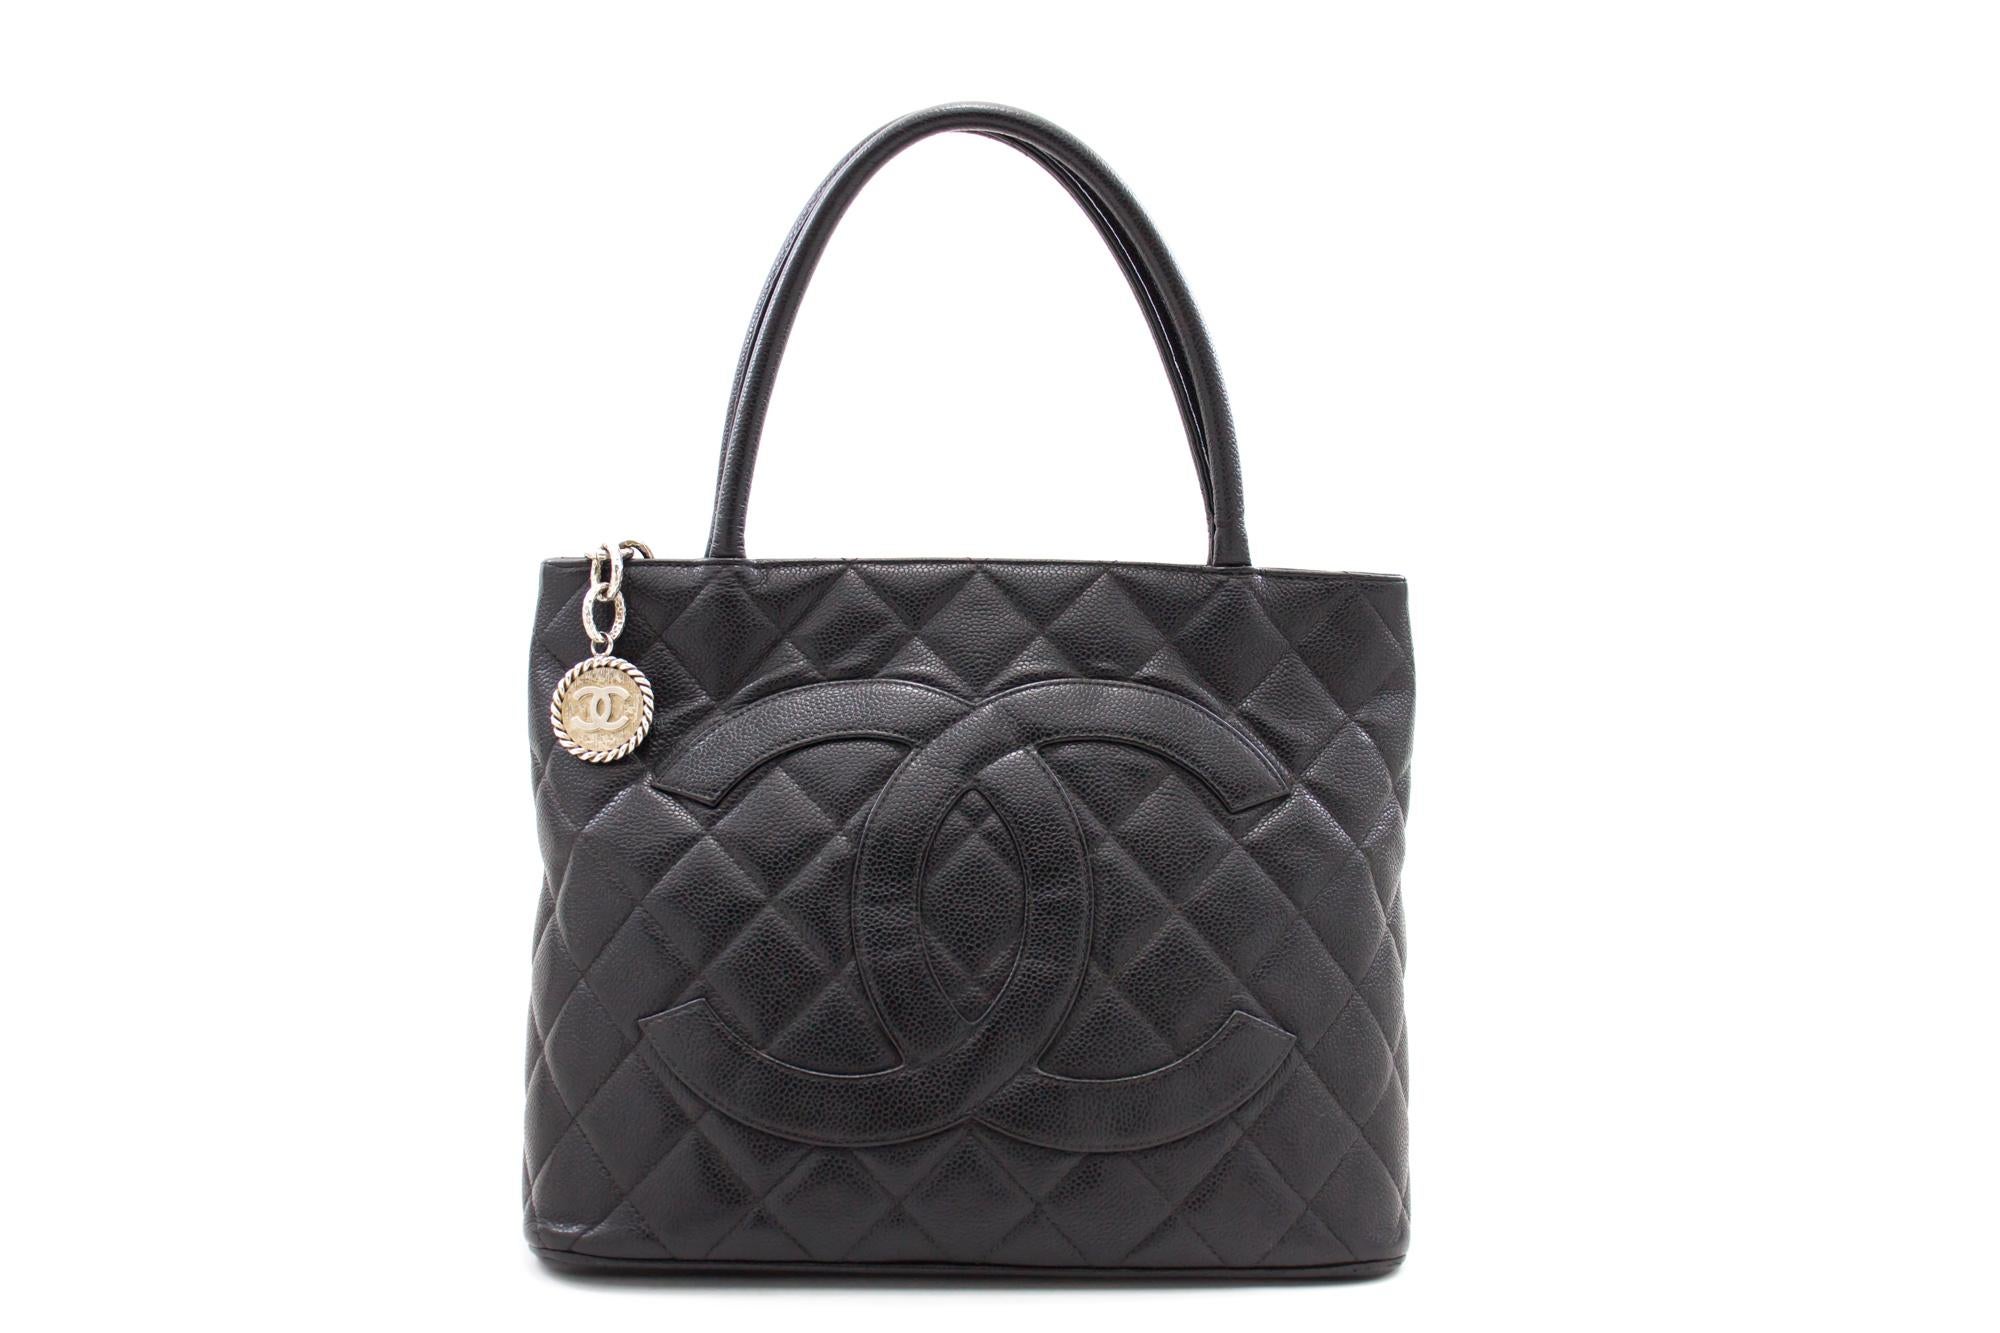 An authentic CHANEL Silver Medallion Caviar Shoulder Bag Shopping Tote Black. The color is Black. The outside material is Leather. The pattern is Solid. This item is Contemporary. The year of manufacture would be 2000-2 0 0 2 .
Conditions &